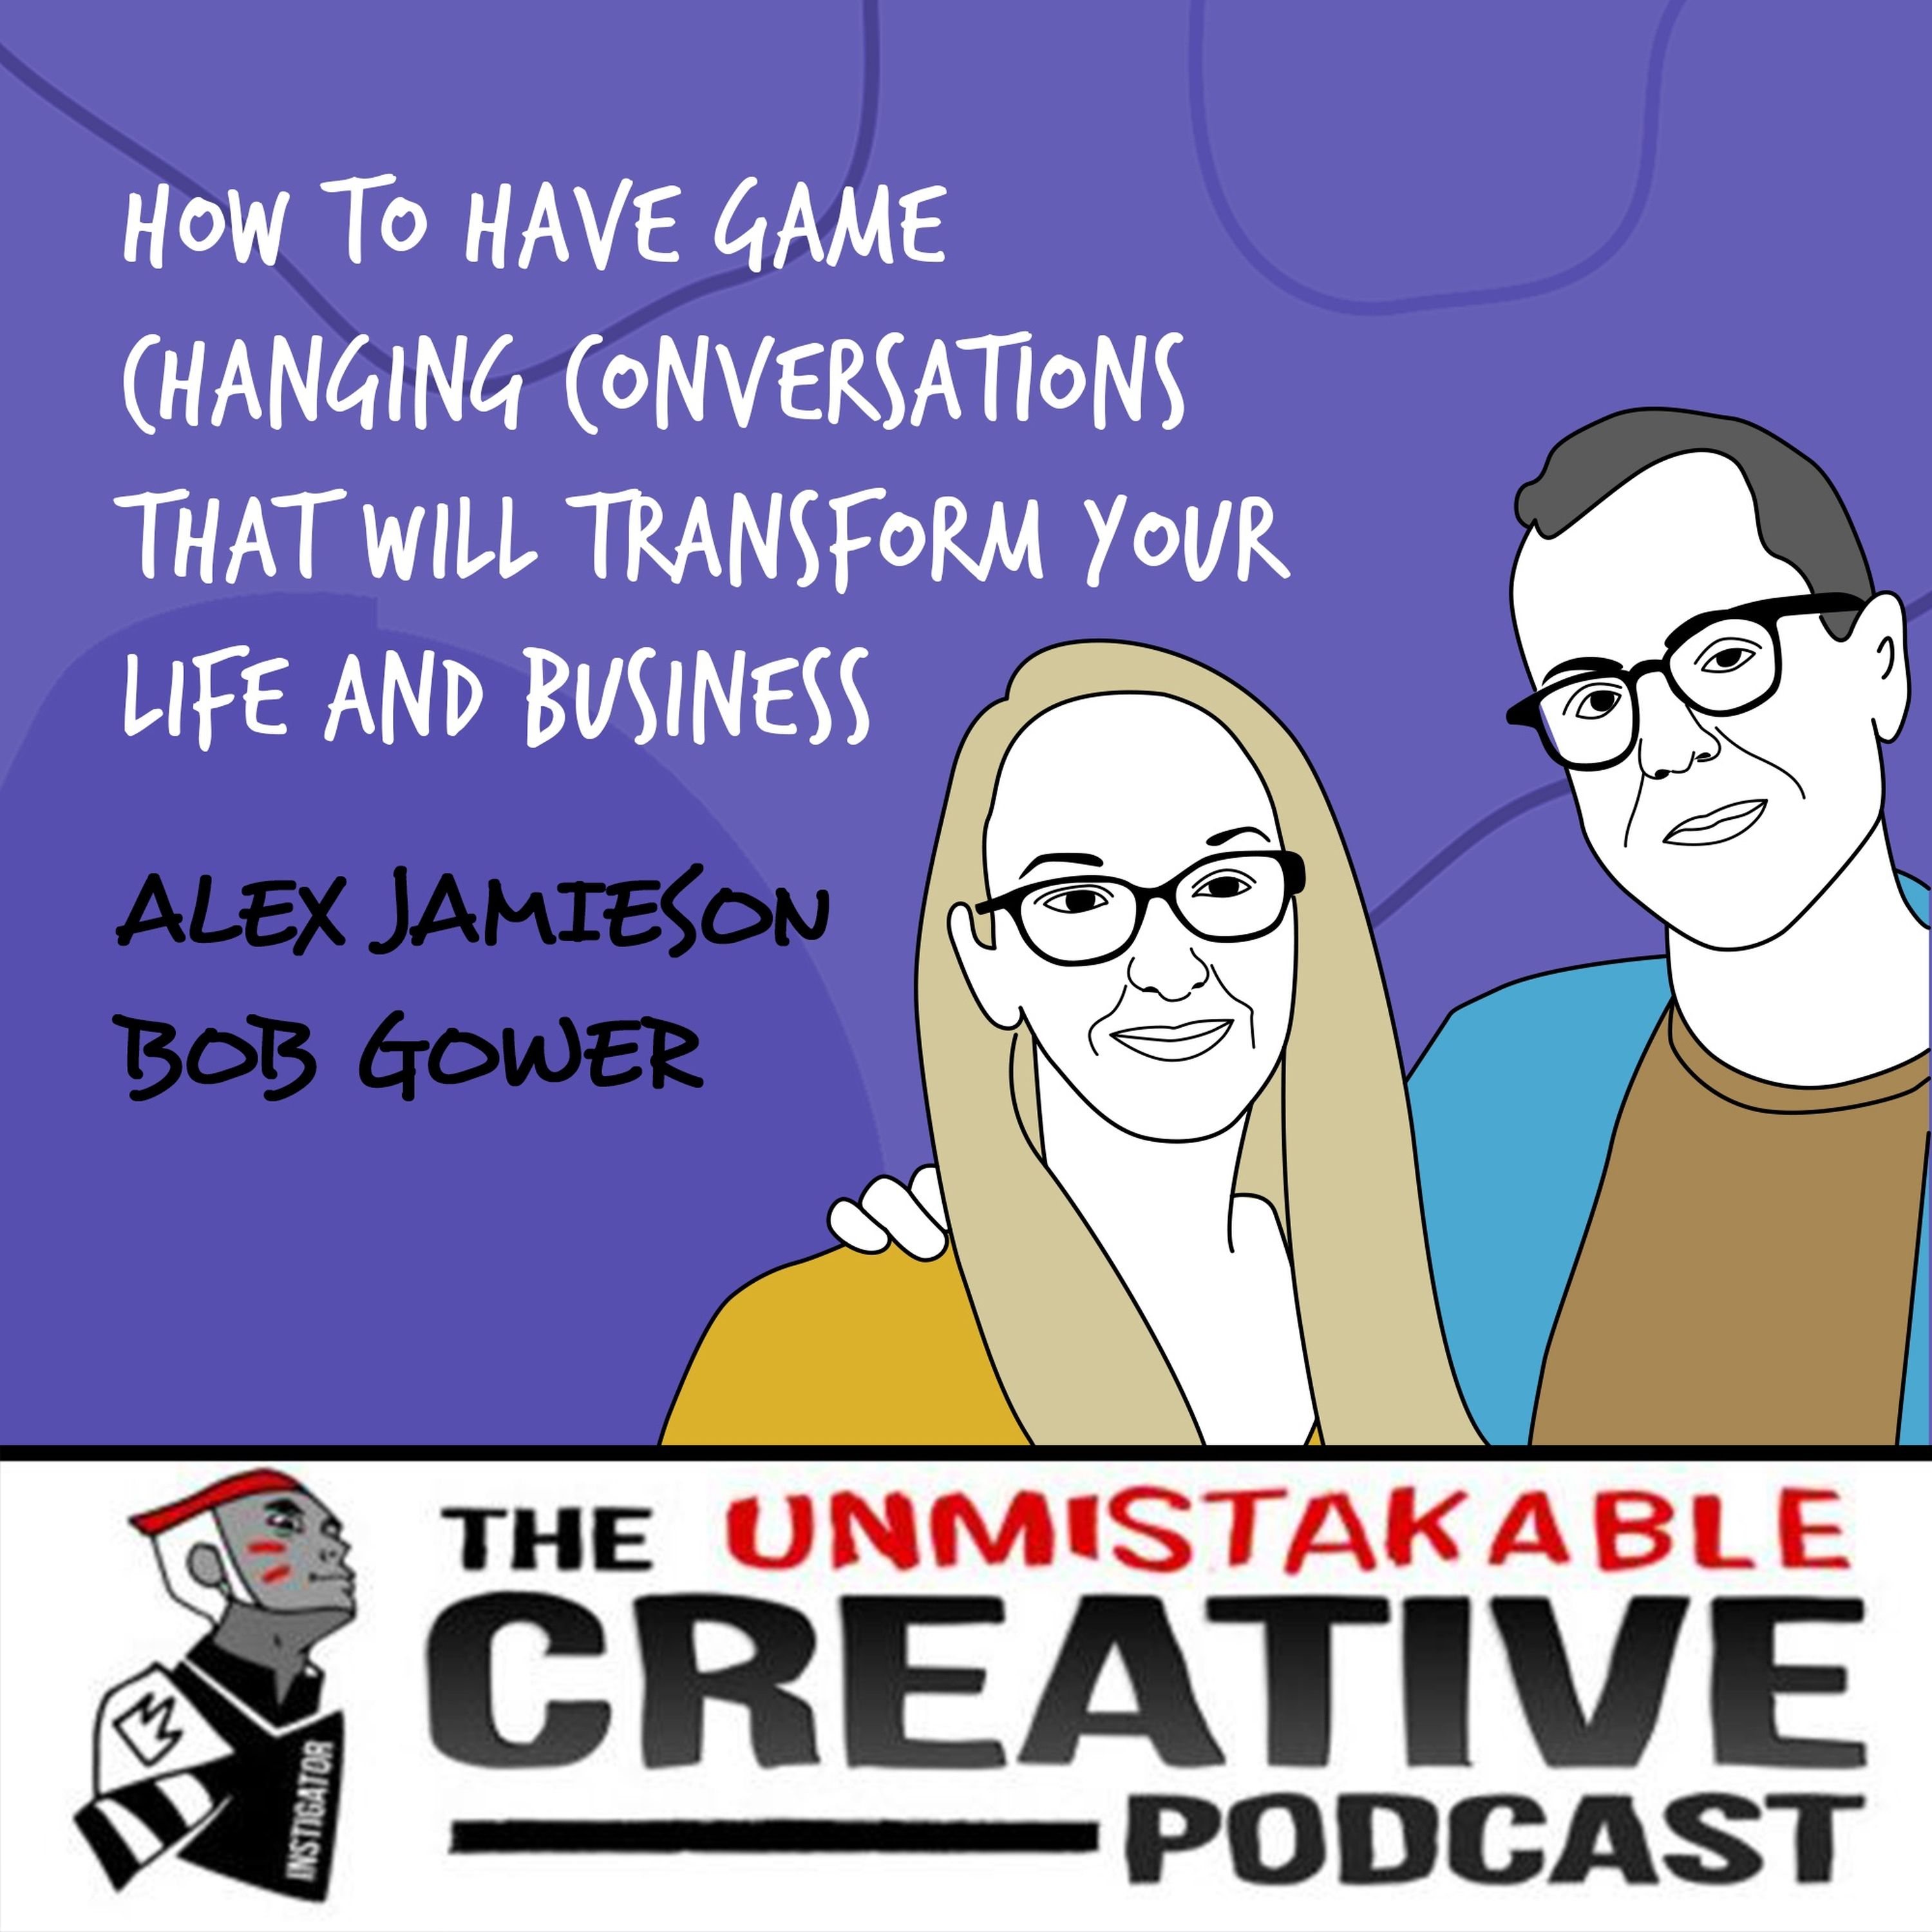 Alex Jamieson & Bob Gower | How to Have Game Changing Conversations That Will Transform Your Life and Business Image